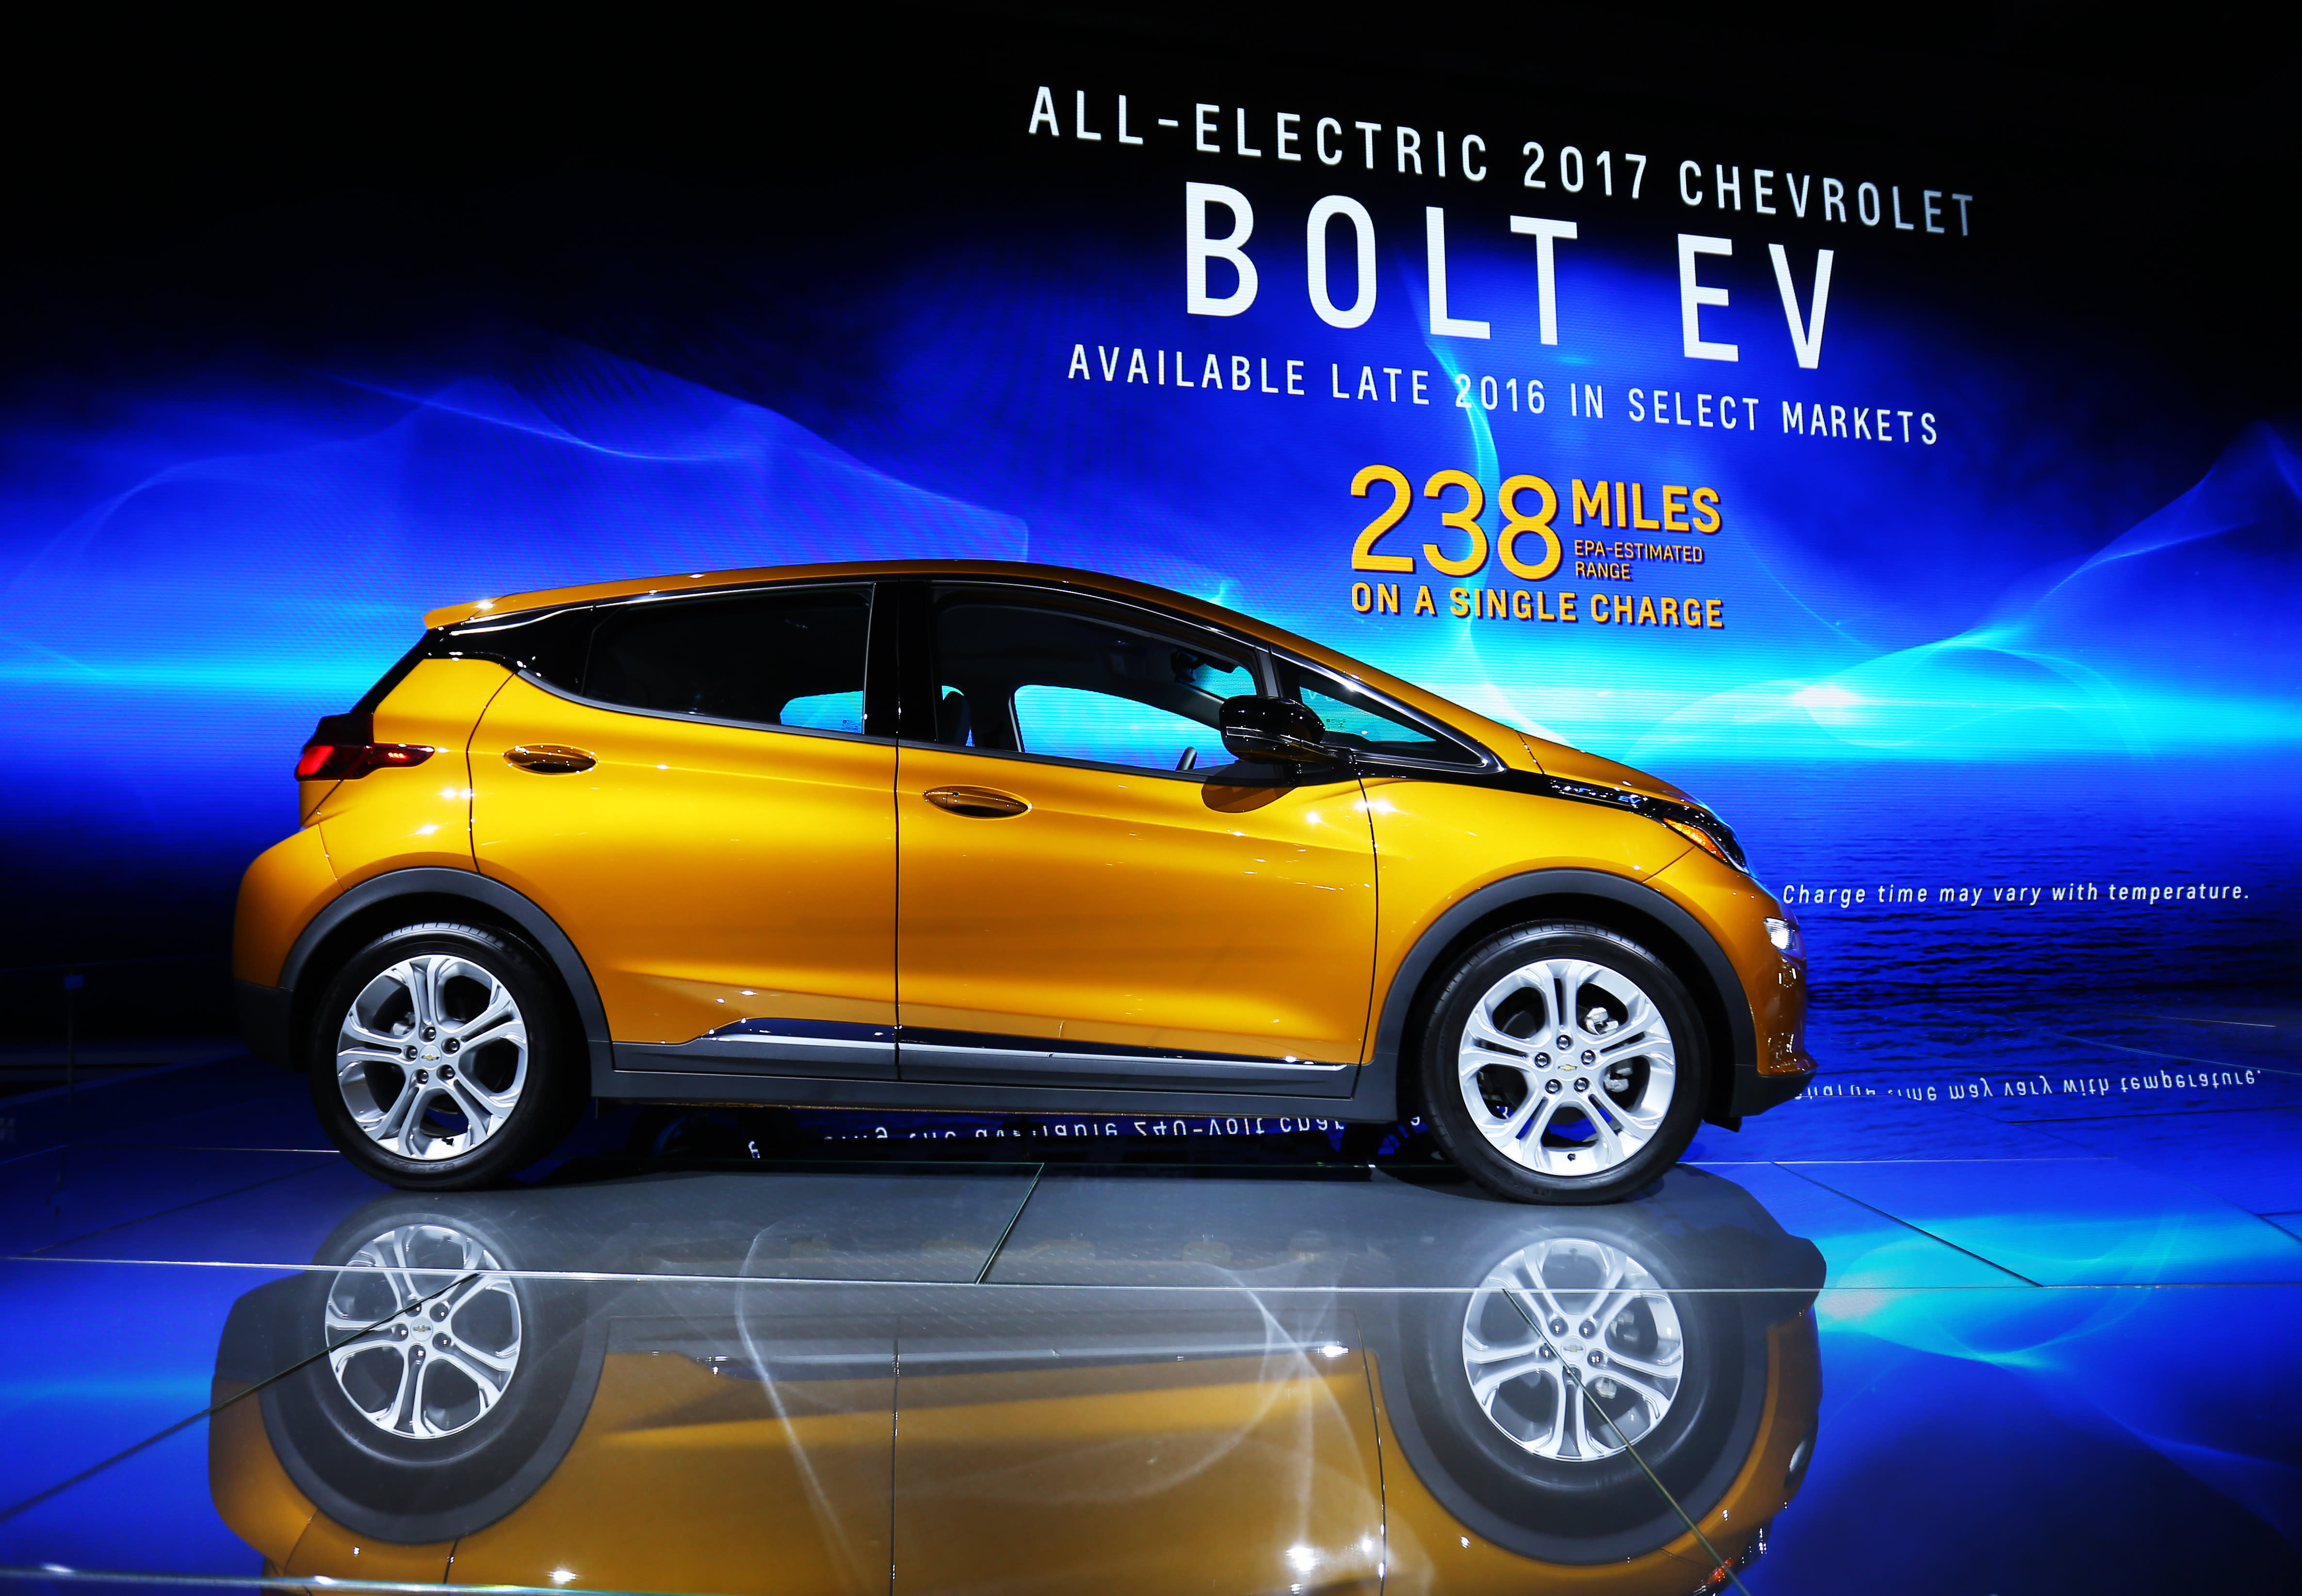 GM's electric vehicle business isn't worth as much as Tesla, but it's